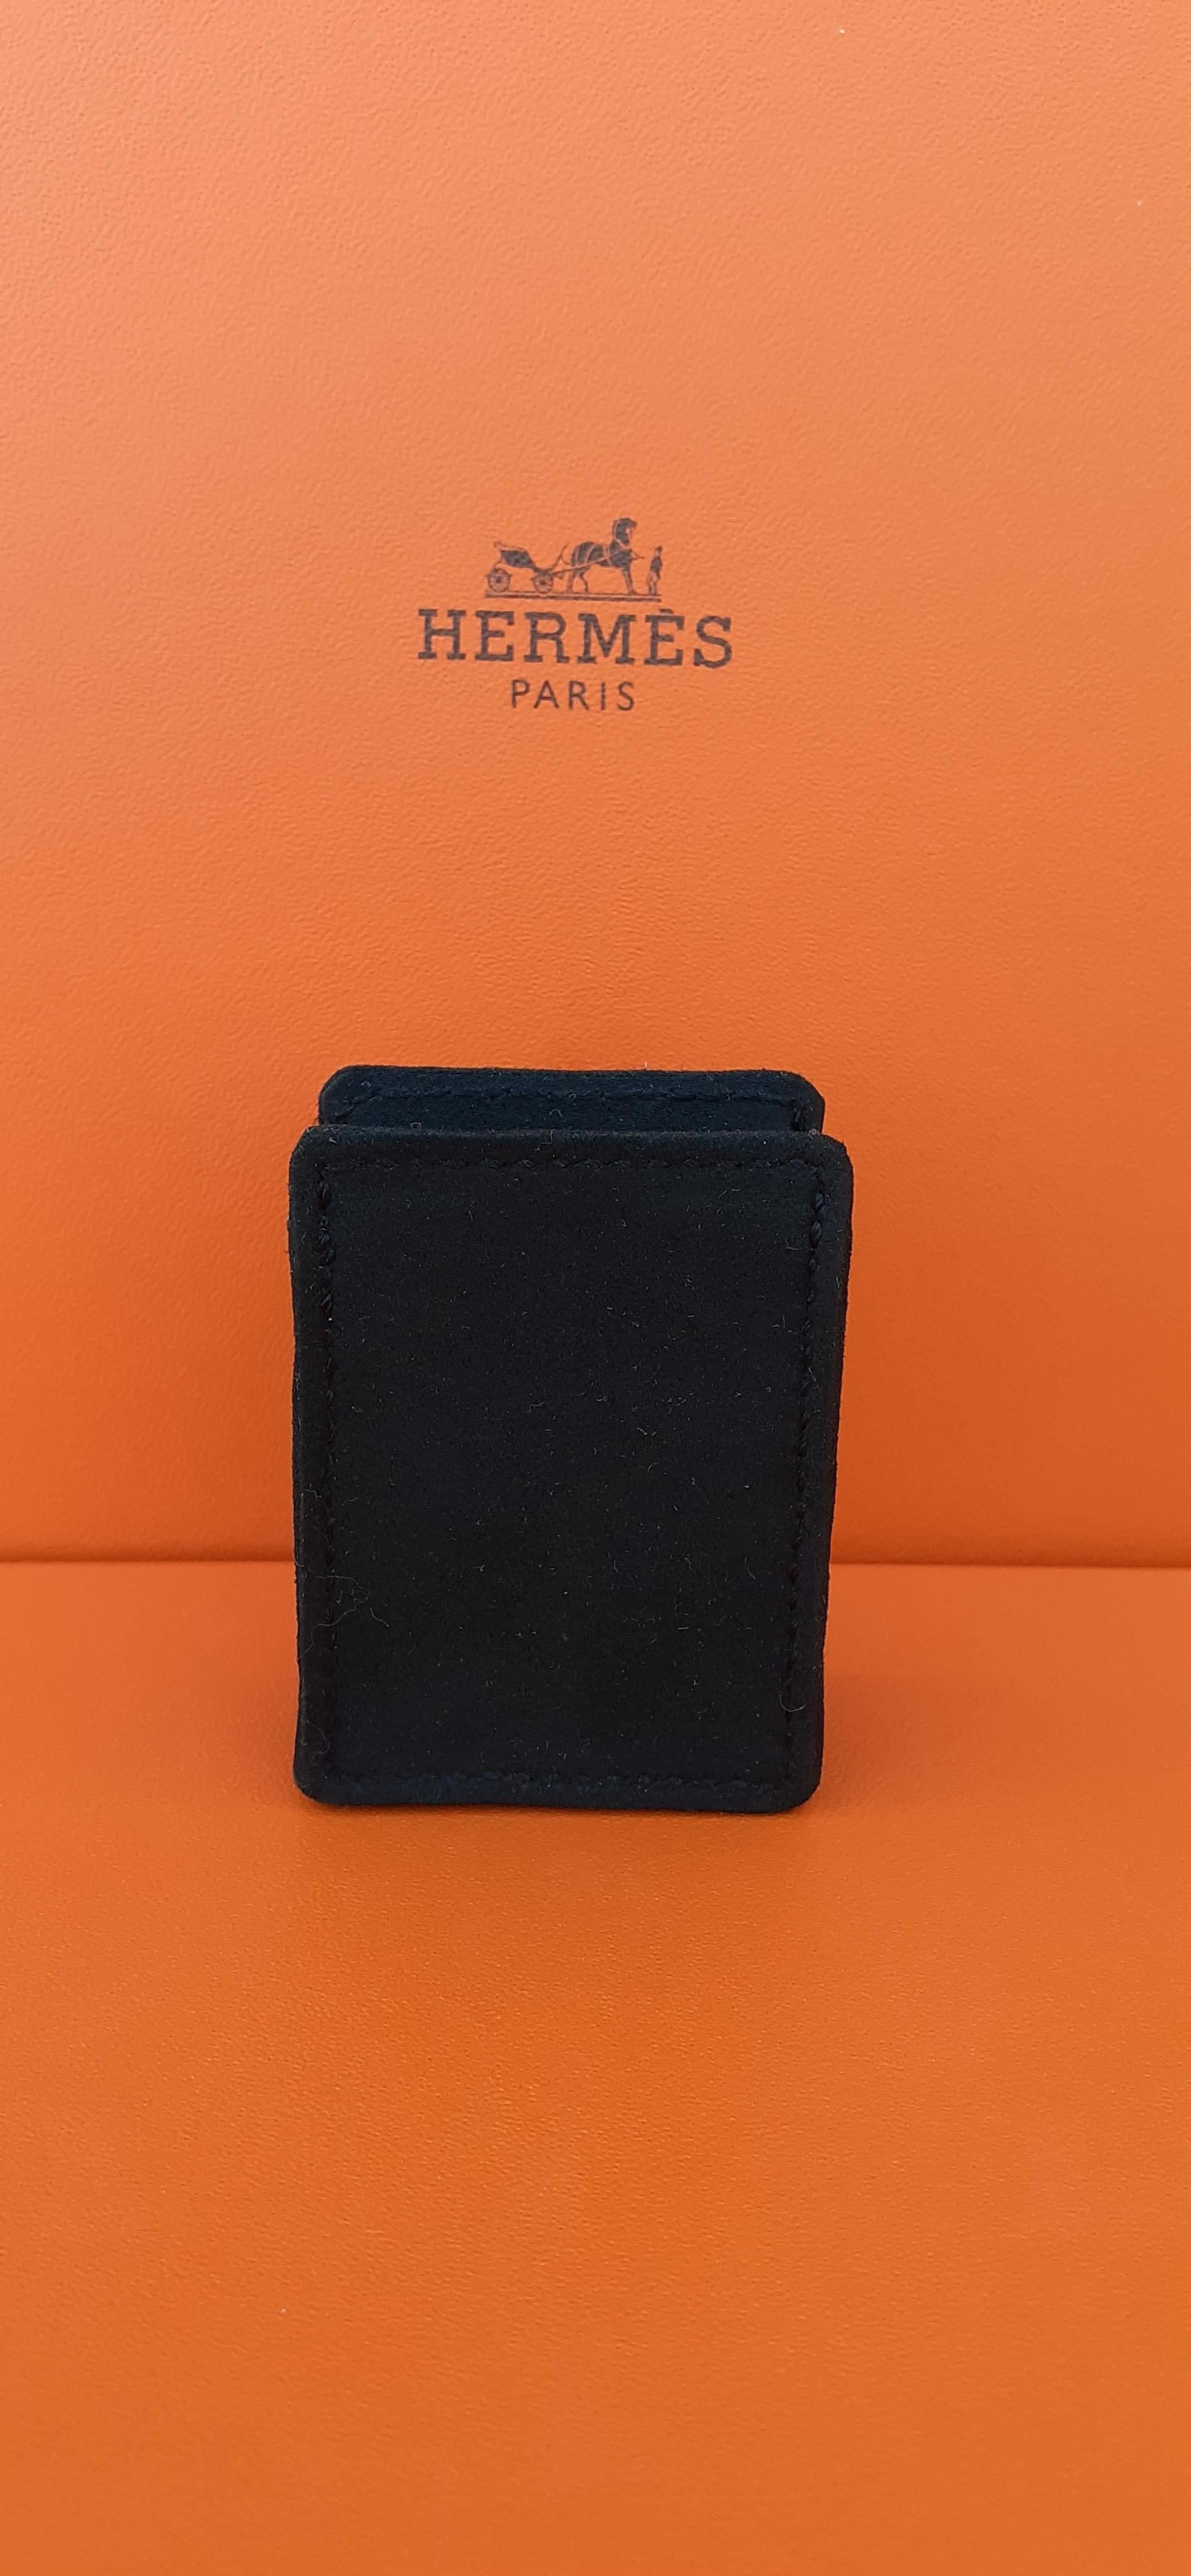 Rare and Beautiful Authentic Hermès Lighter Case

Vintage Item

Made of Doblis (Suede) Leather

Colorway: Black

